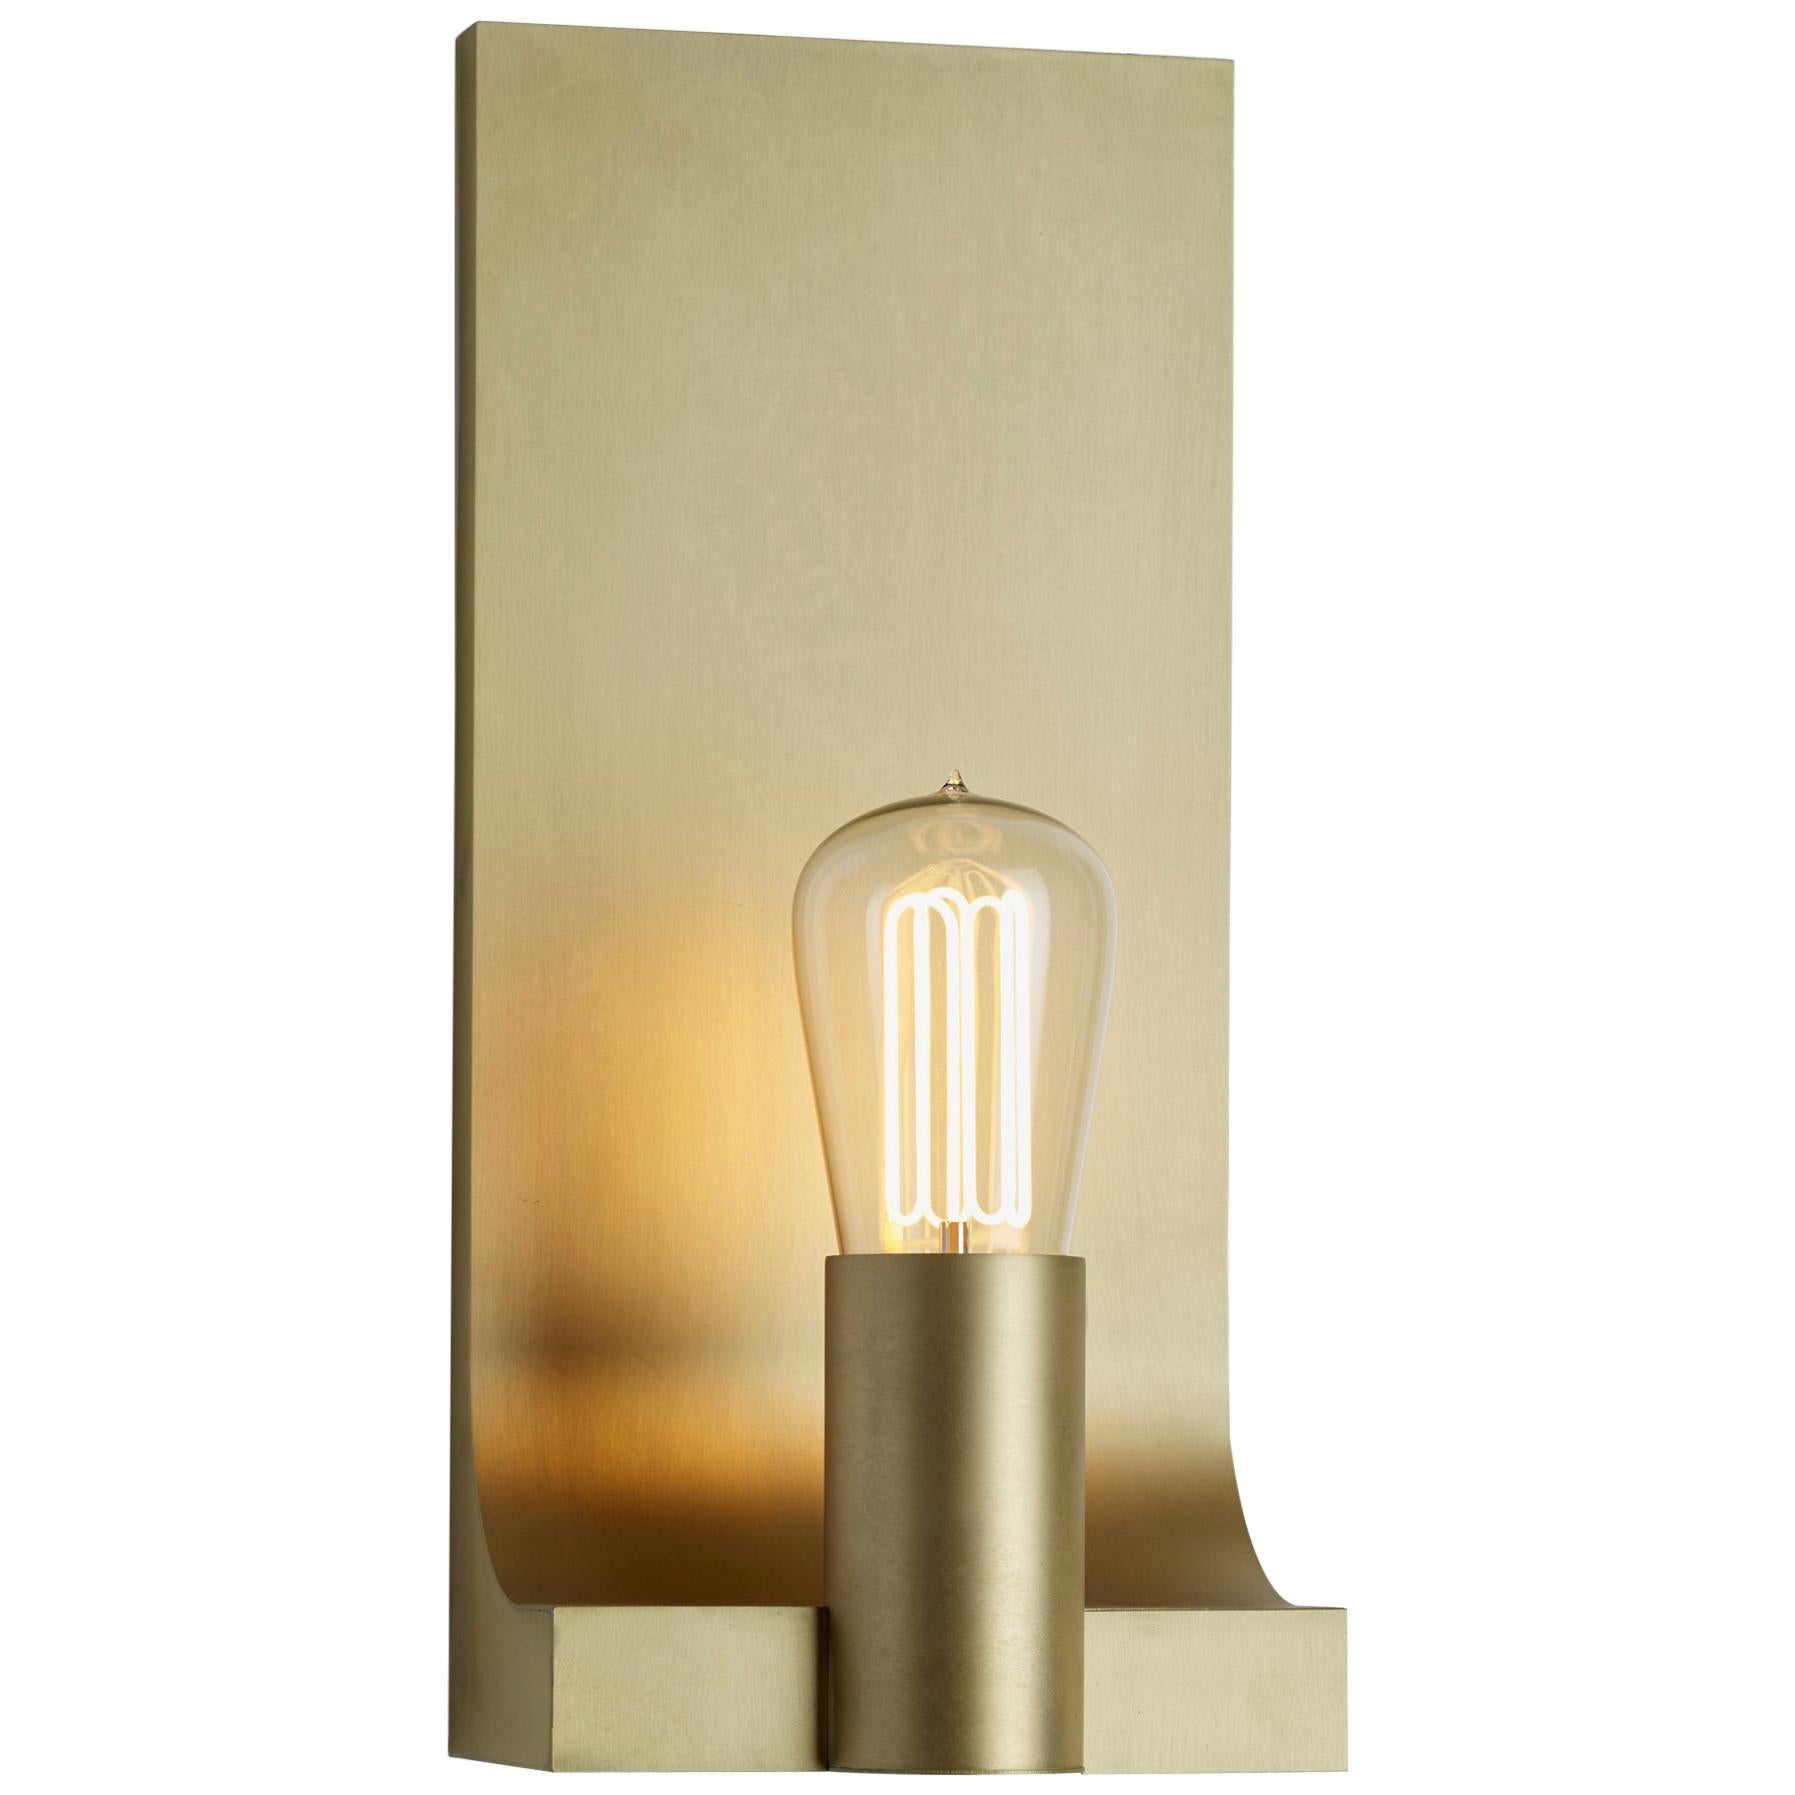 Tekna Walcott Wall Light with Sateen Brass Finish For Sale at 1stDibs